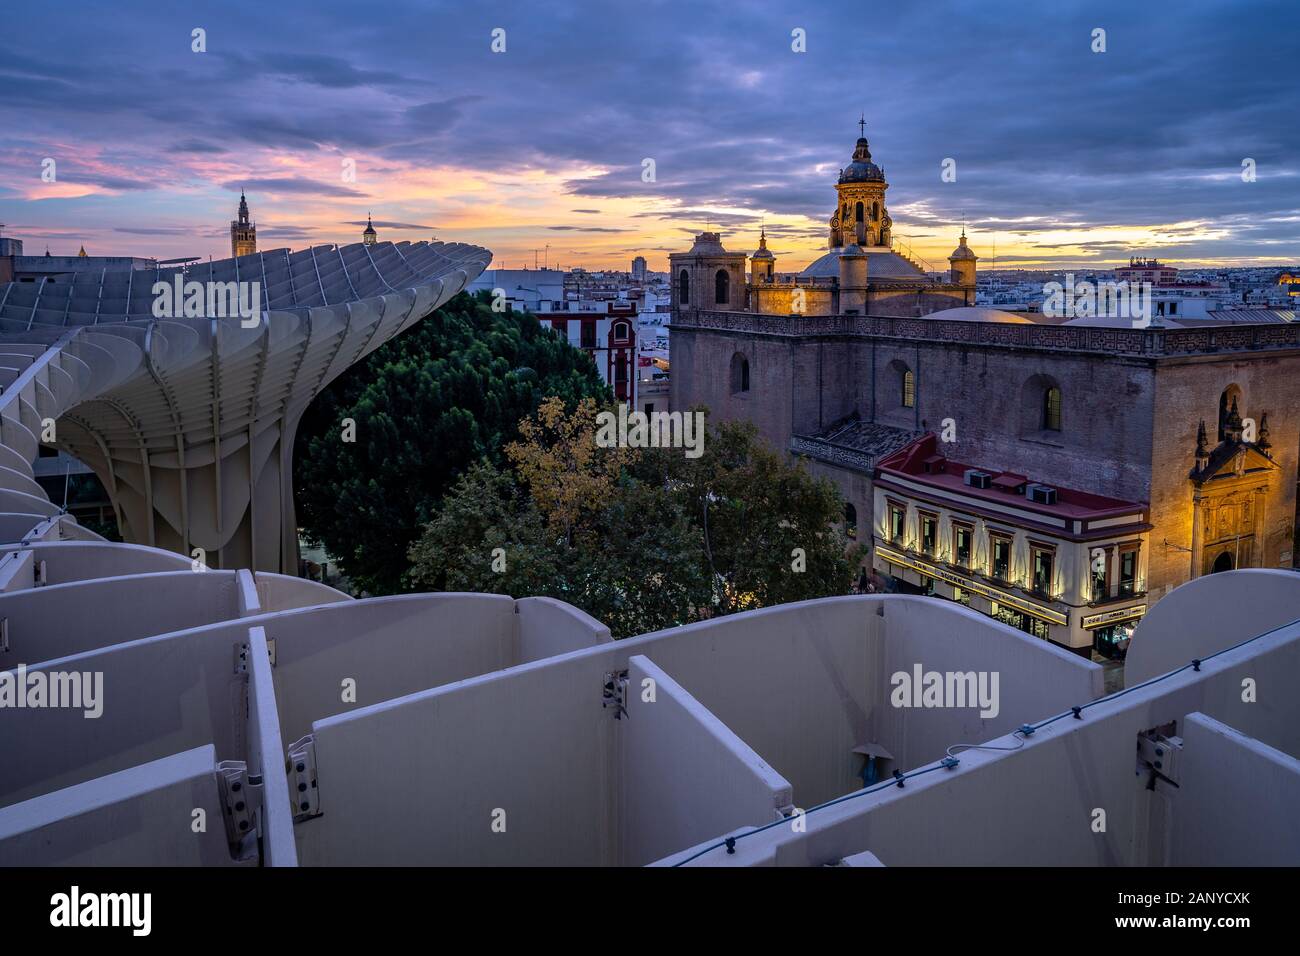 Seville, Spain - The Church of the Annunciation as seen from Sevilla Mushrooms Stock Photo